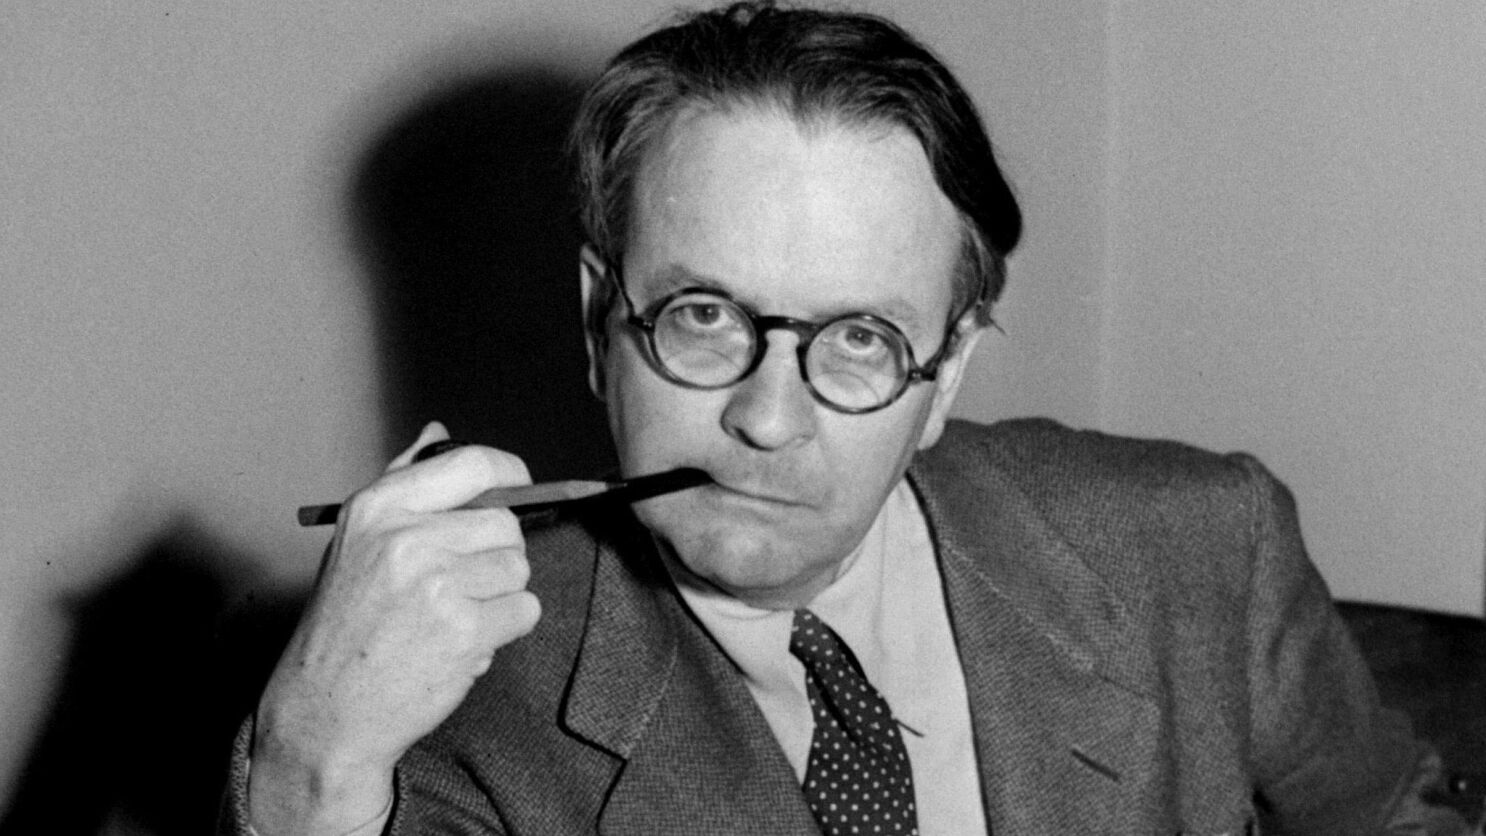 From the Archves: Raymond Chandler, Top Mystery Writer, Dies